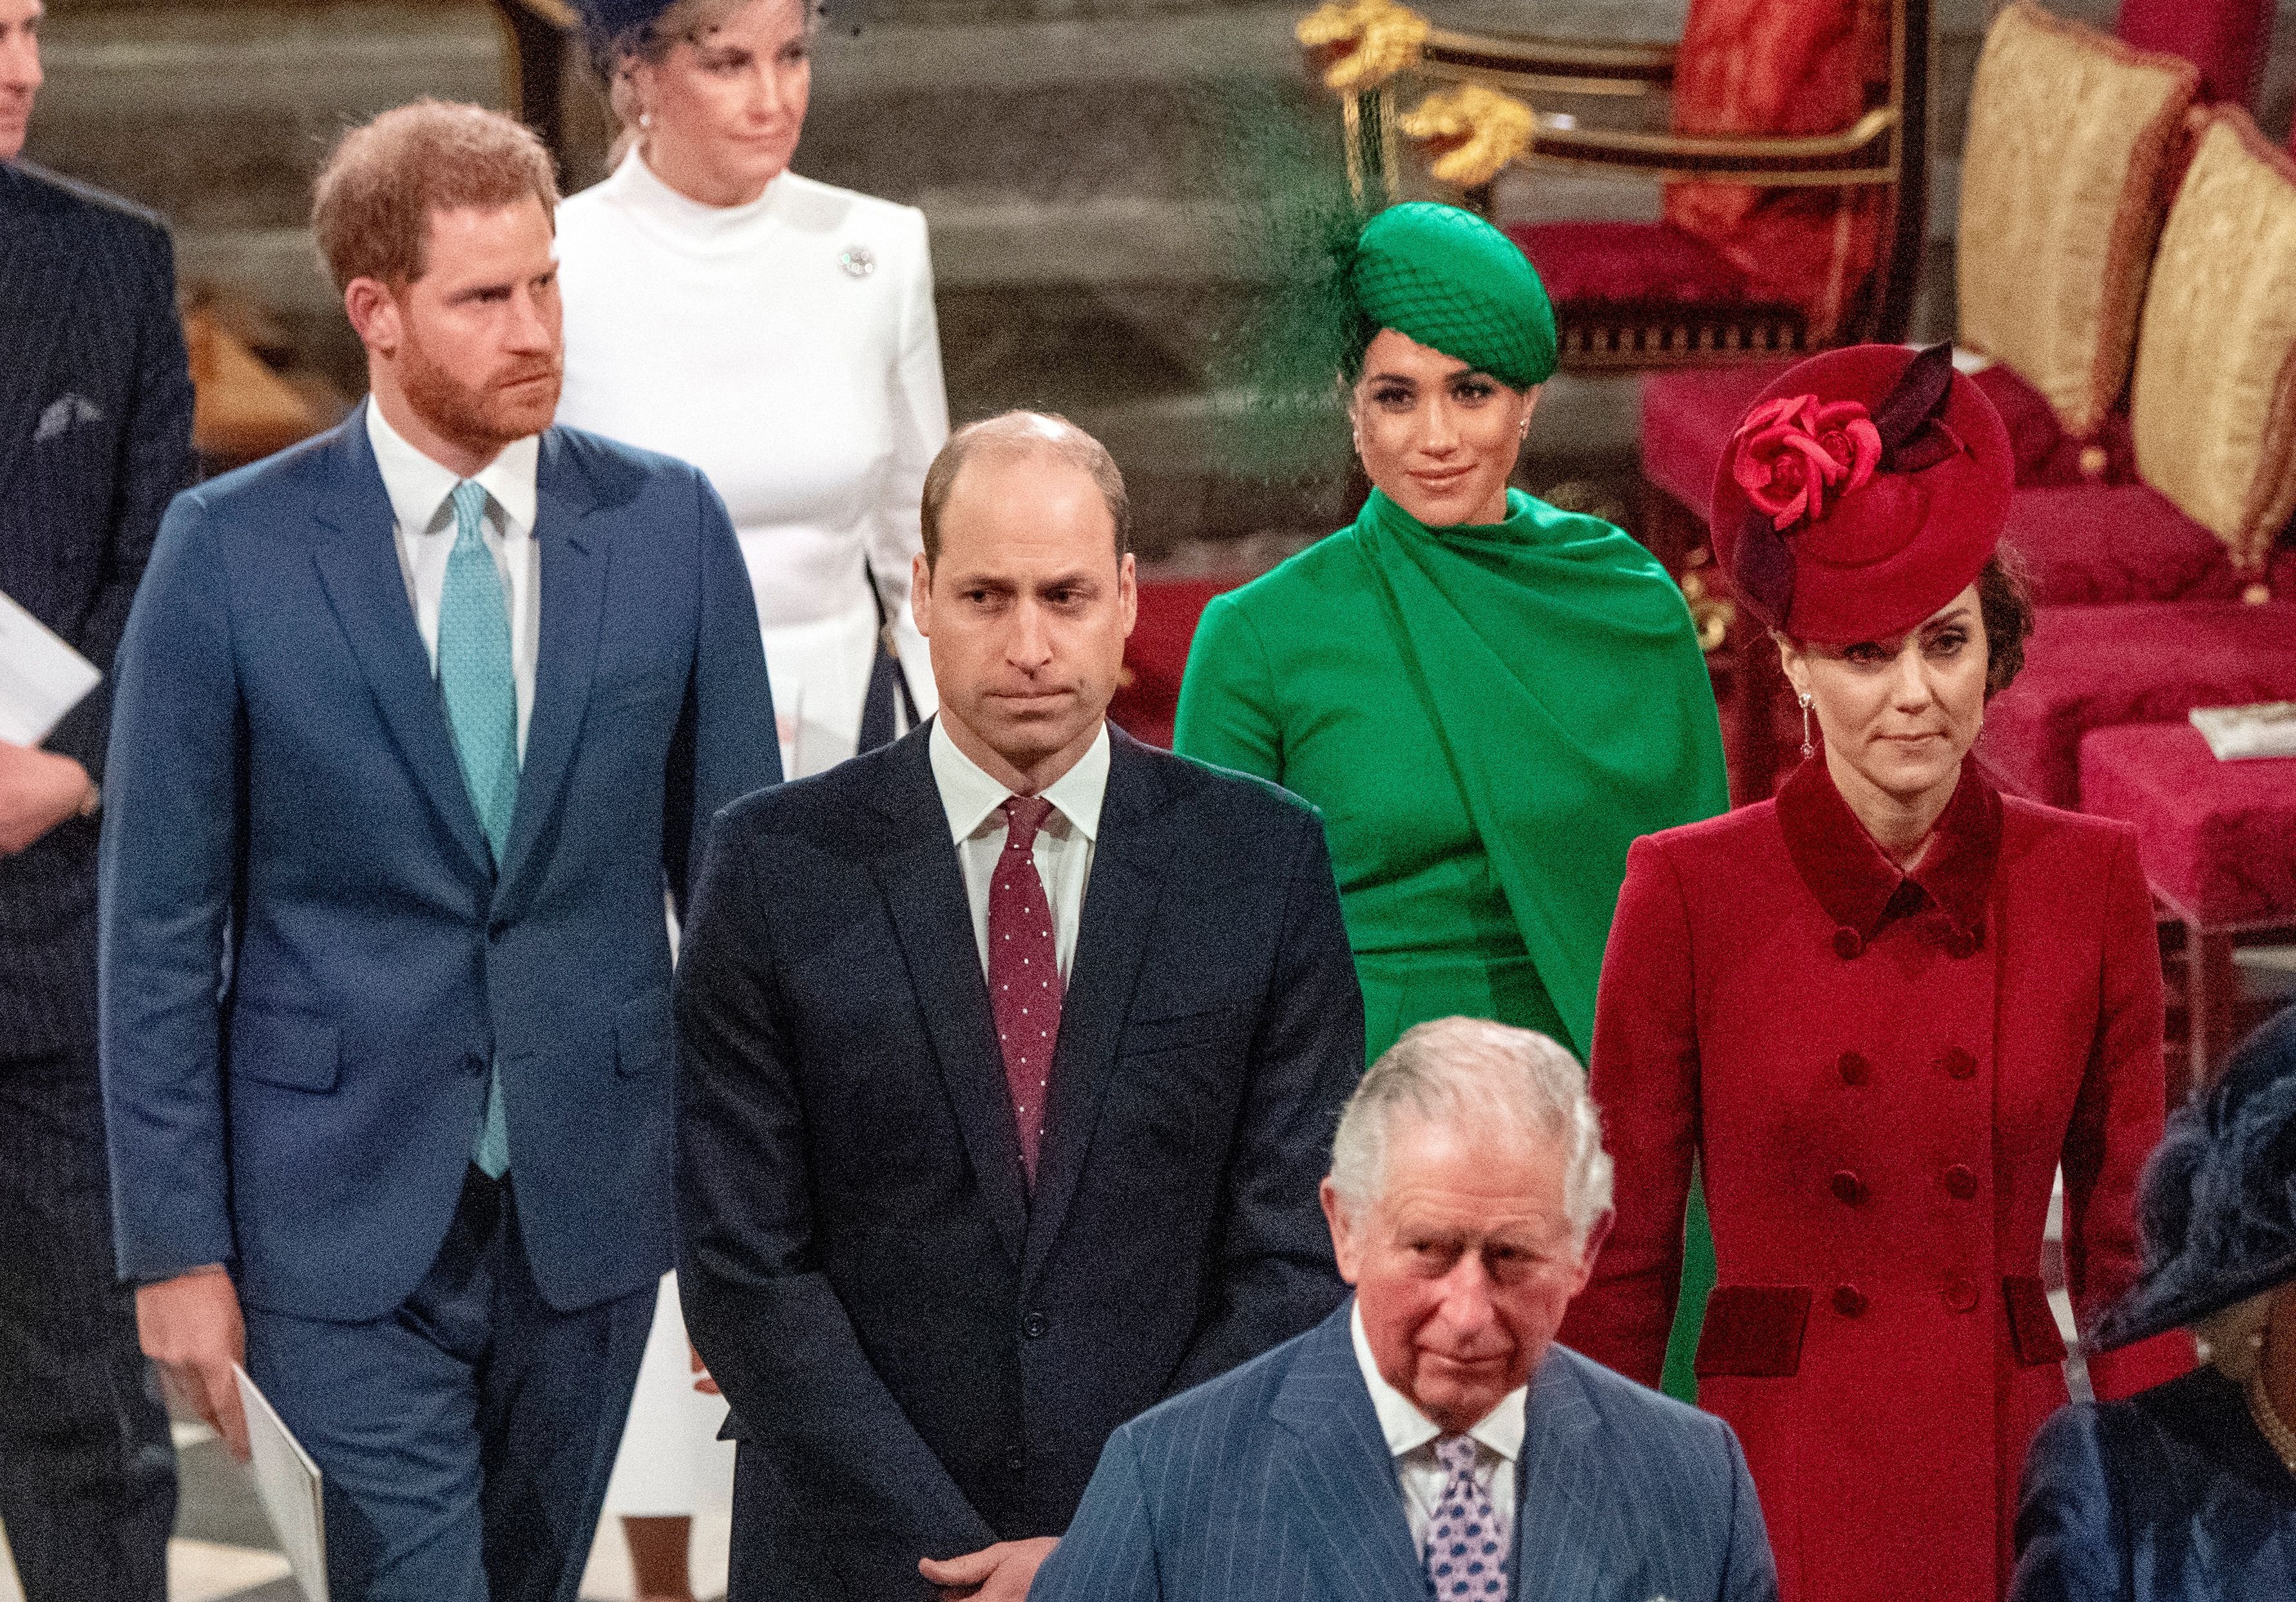 Prince Harry, Meghan Markle, Prince William, Kate Middleton, and Prince Charles photographed in Westminster Abbey after attending the annual Commonwealth Service in London on March 9, 2020. / Source: Getty Images